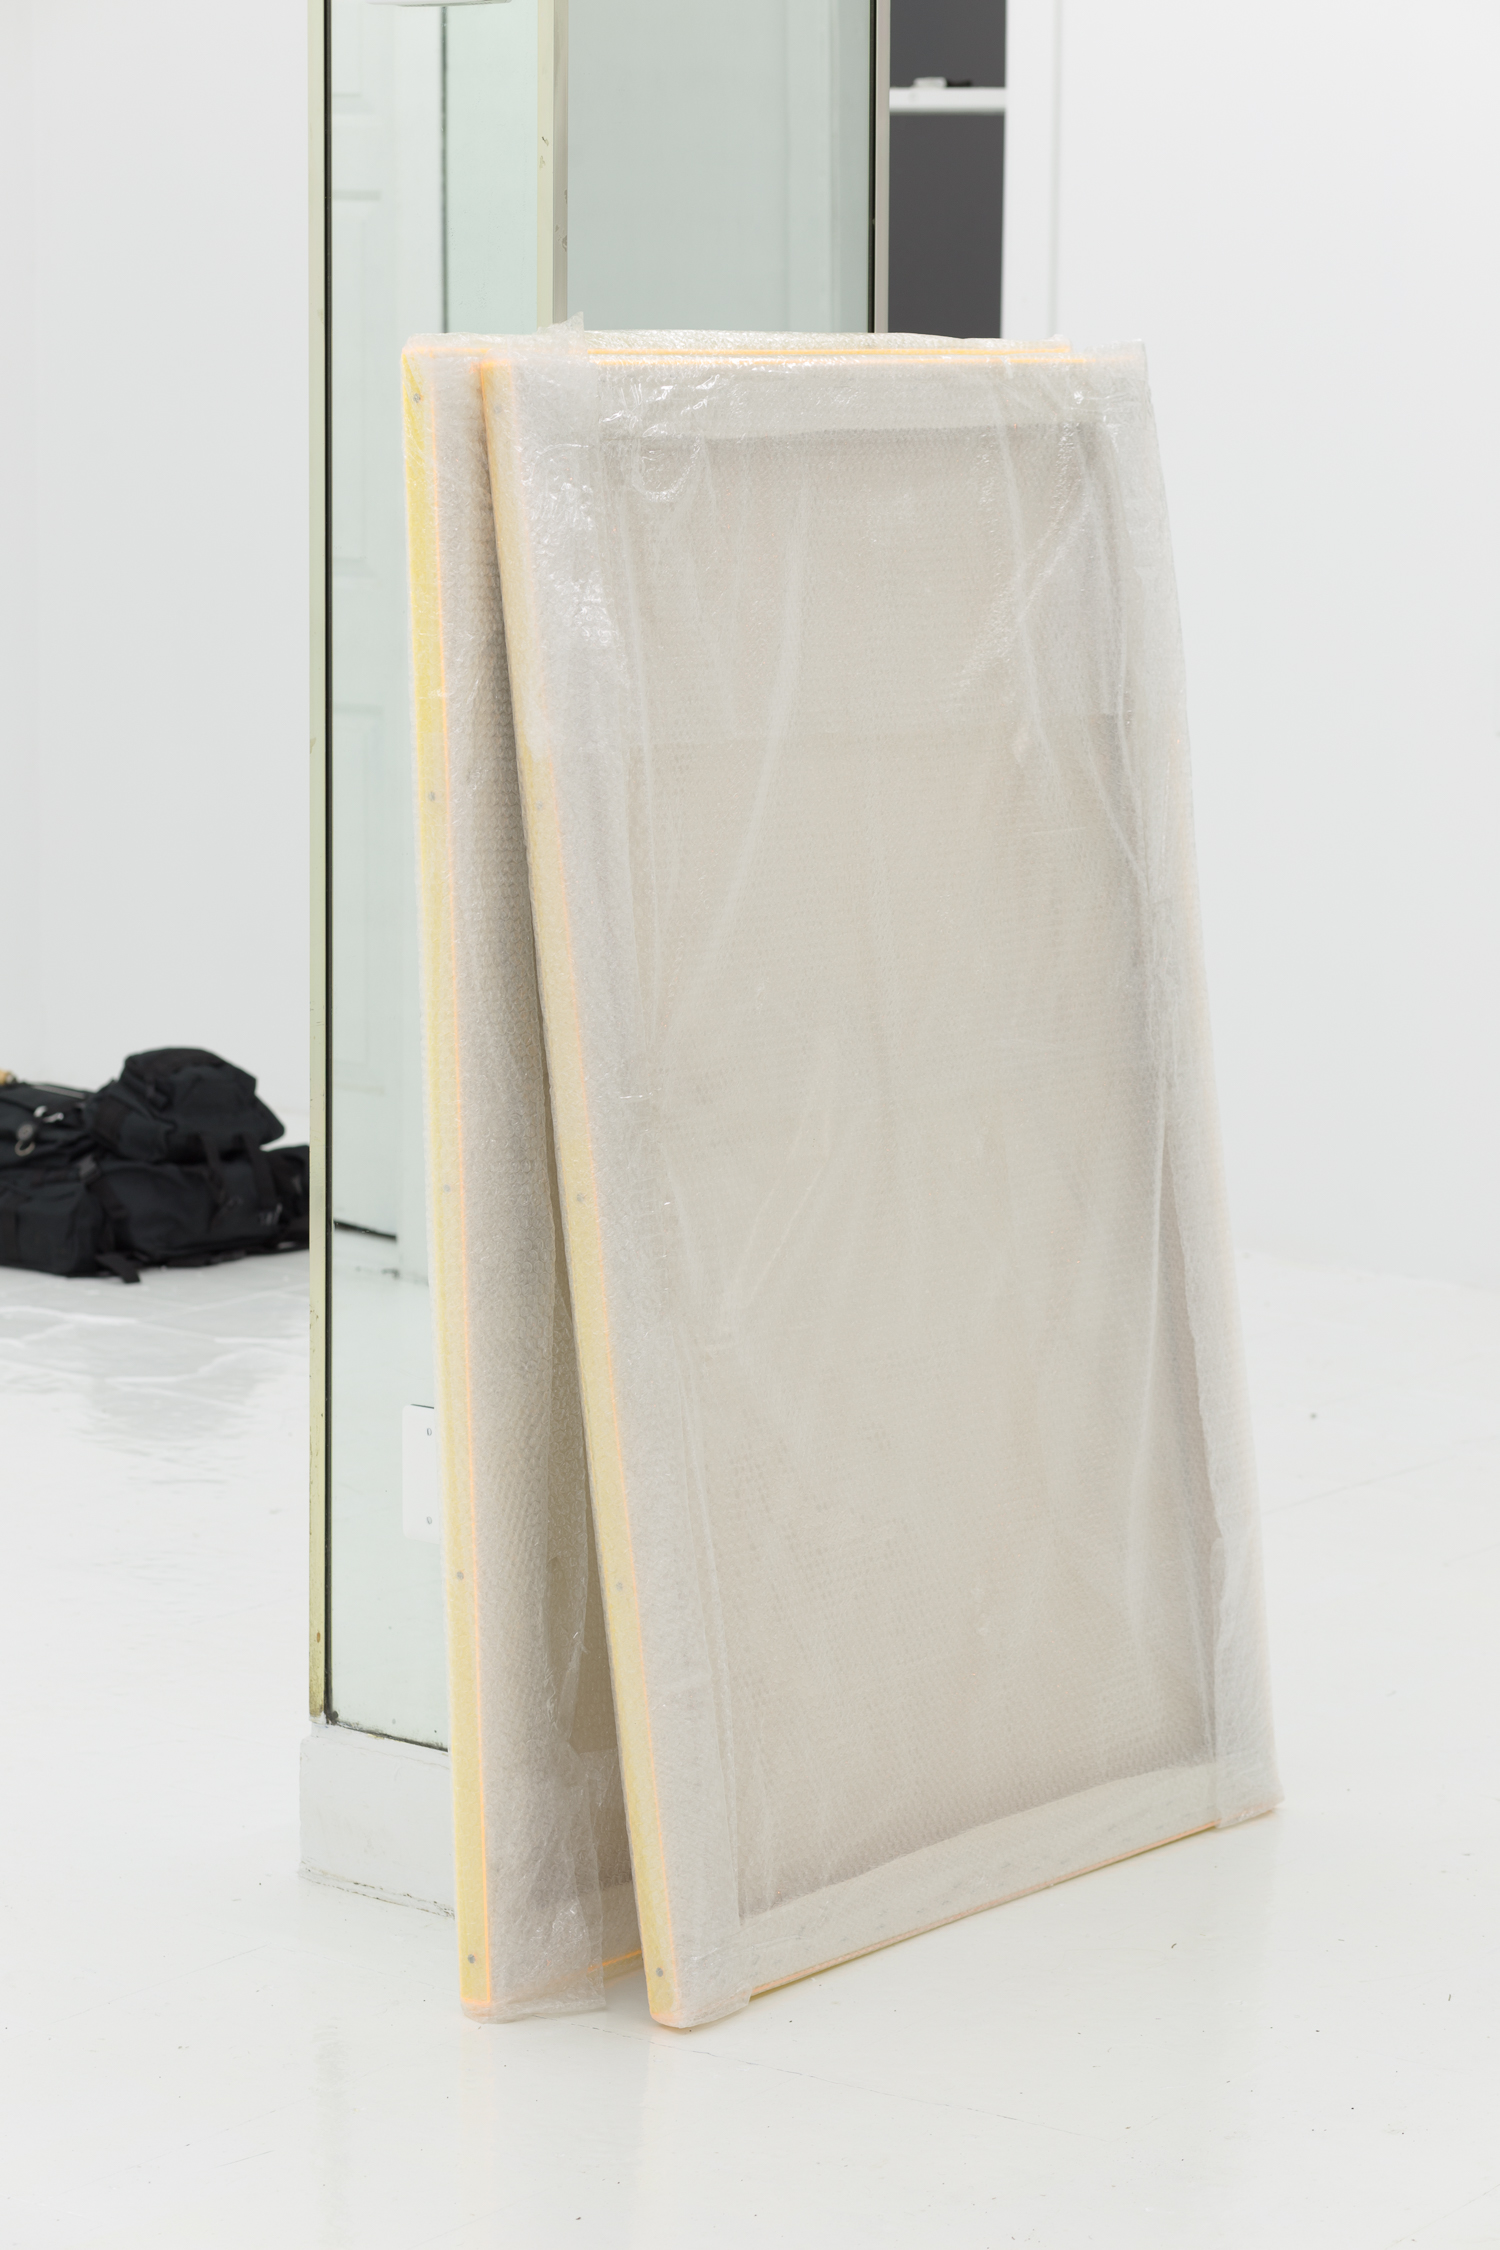 Paintings wrapped in plastic lean against a mirrored column